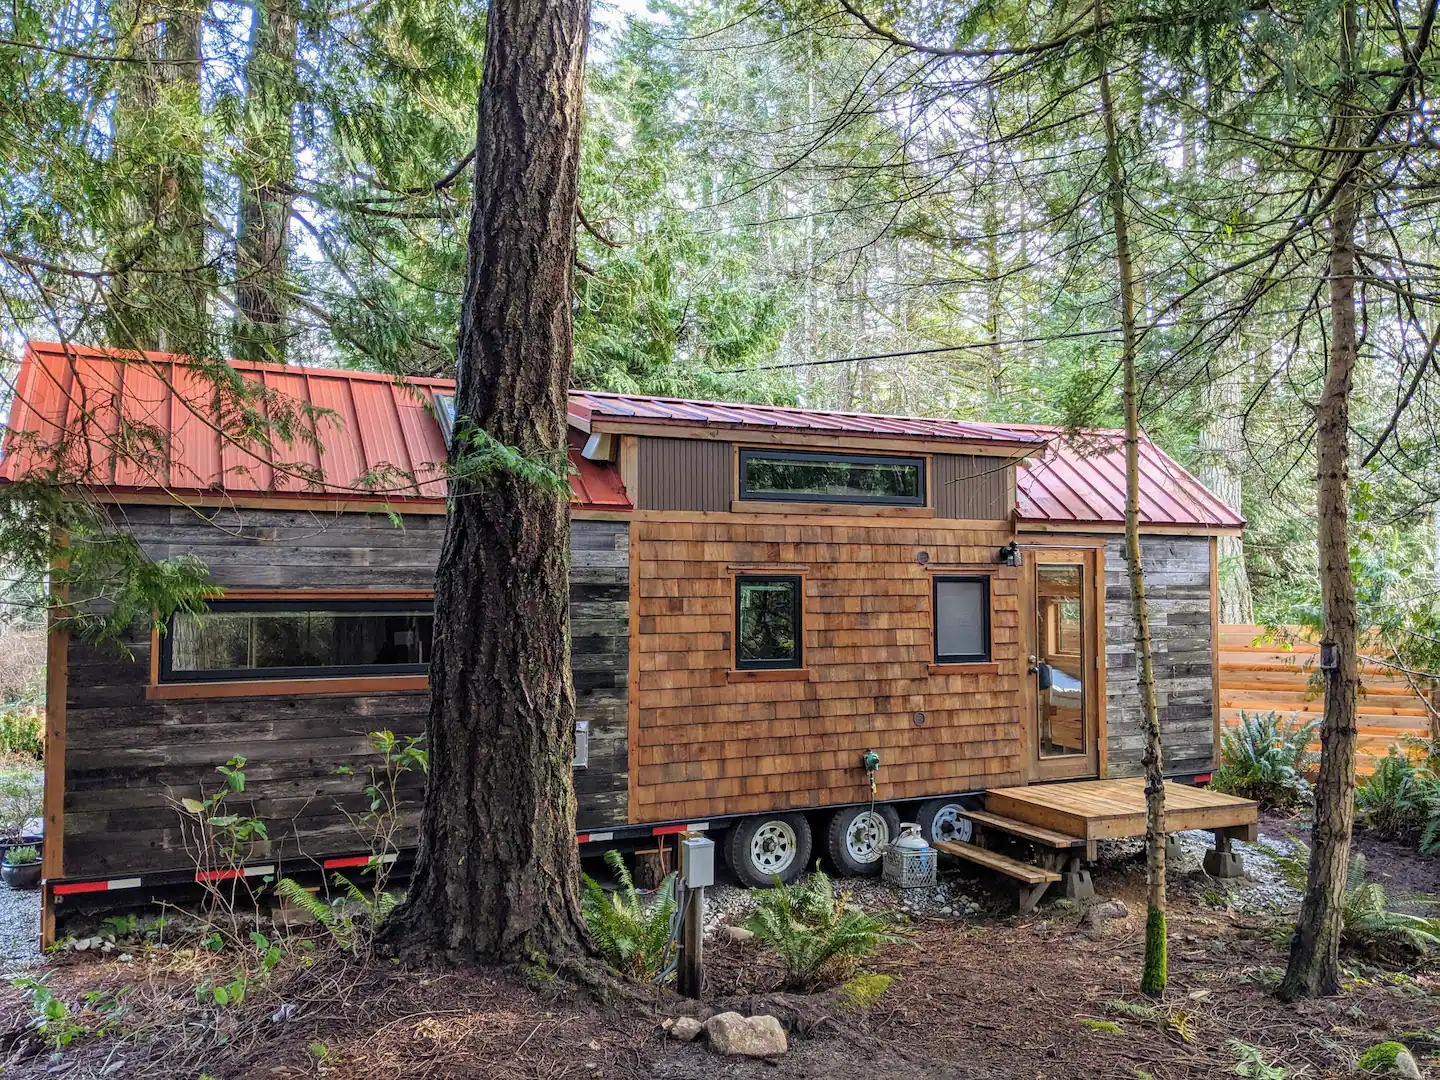 Backyard of Cabin house located in wood, on three wheels with a lot of windows